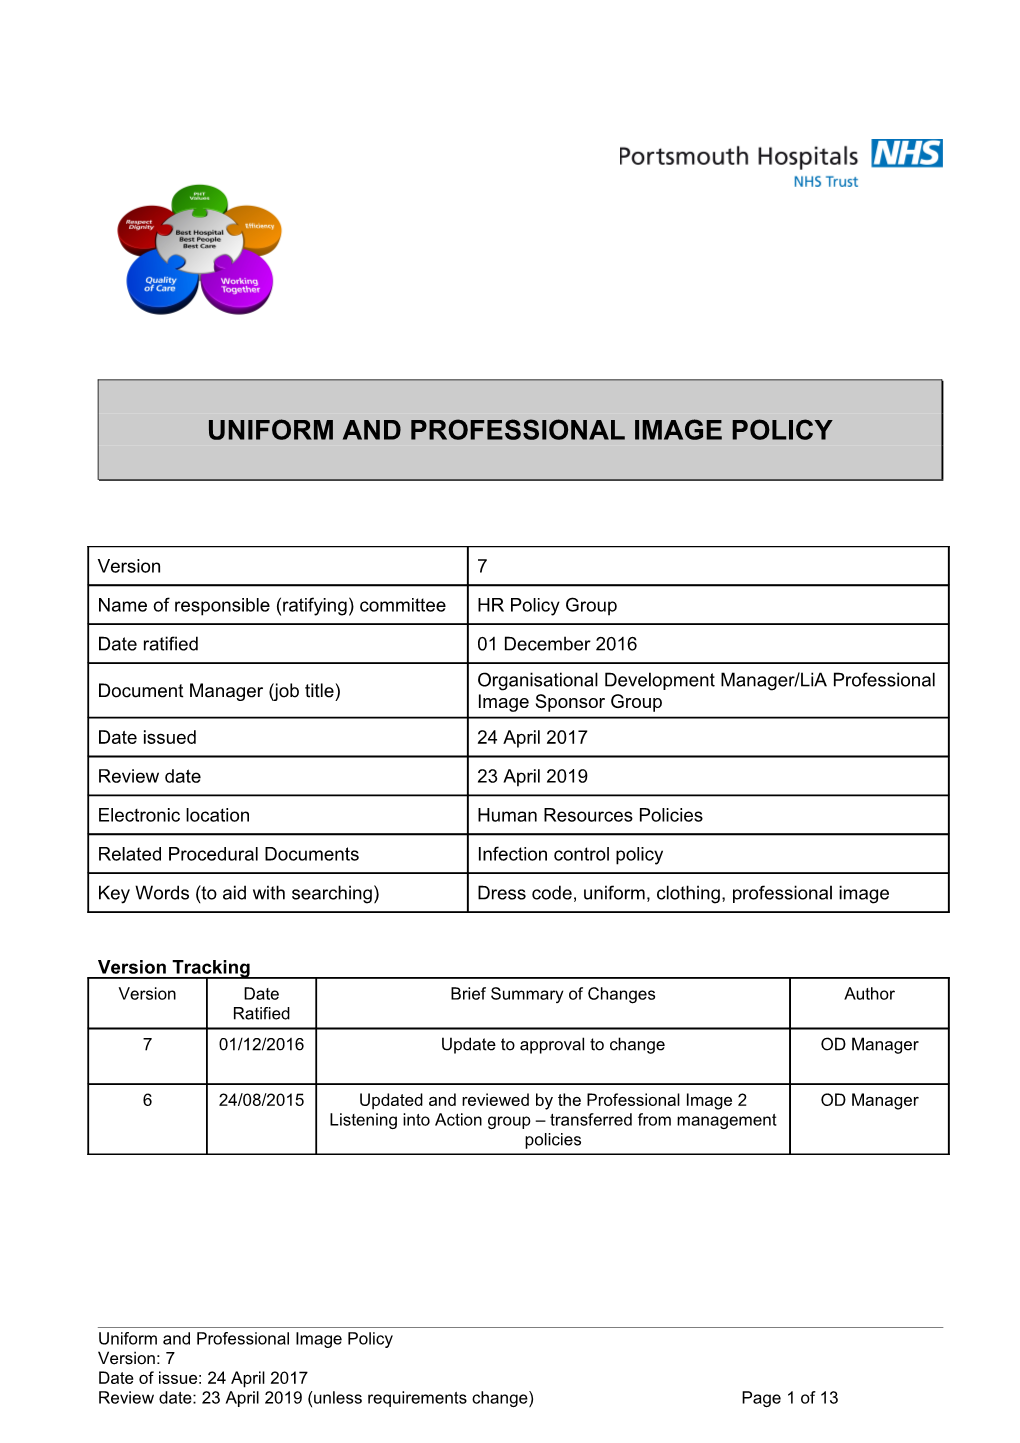 Uniform and Professional Image Policy